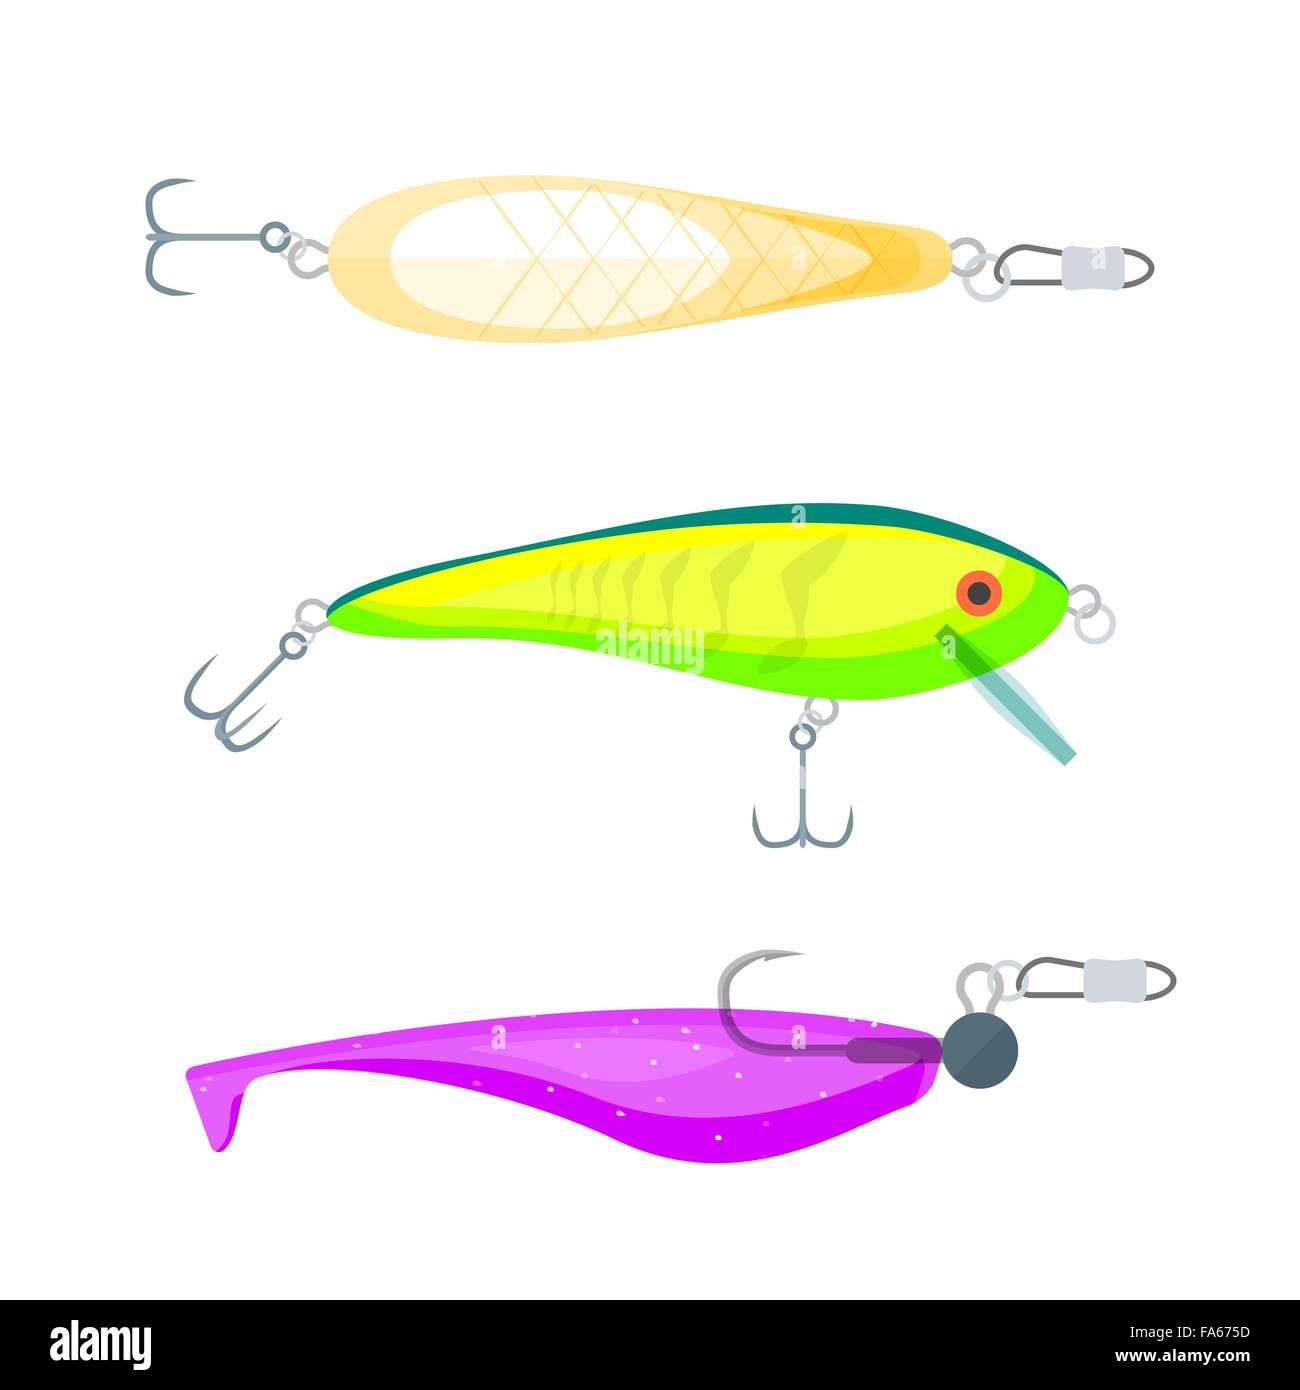 Lure design Stock Vector Images - Alamy